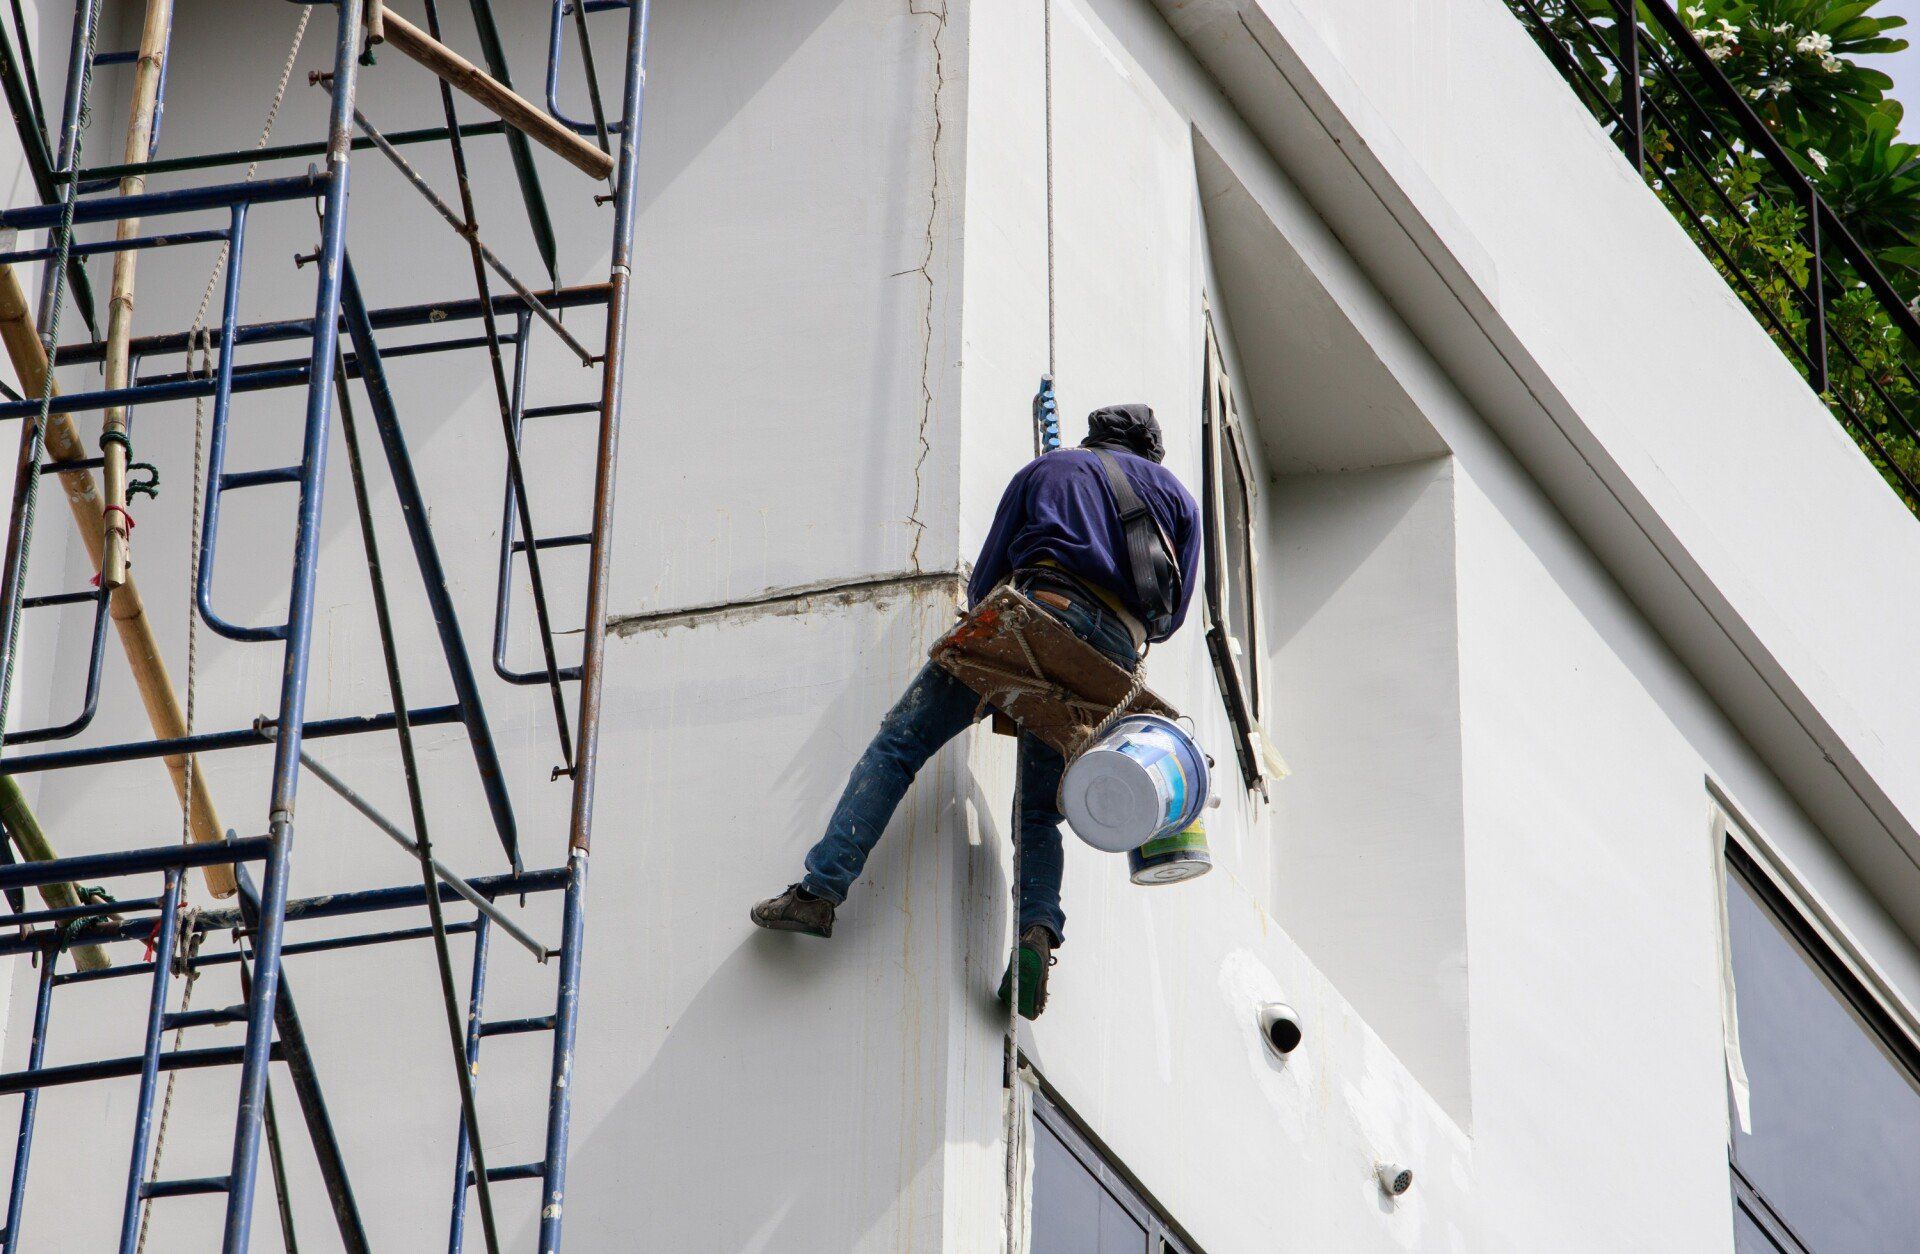 a local painter hanging by rope, painting the exterior of this building in Coral Springs FL